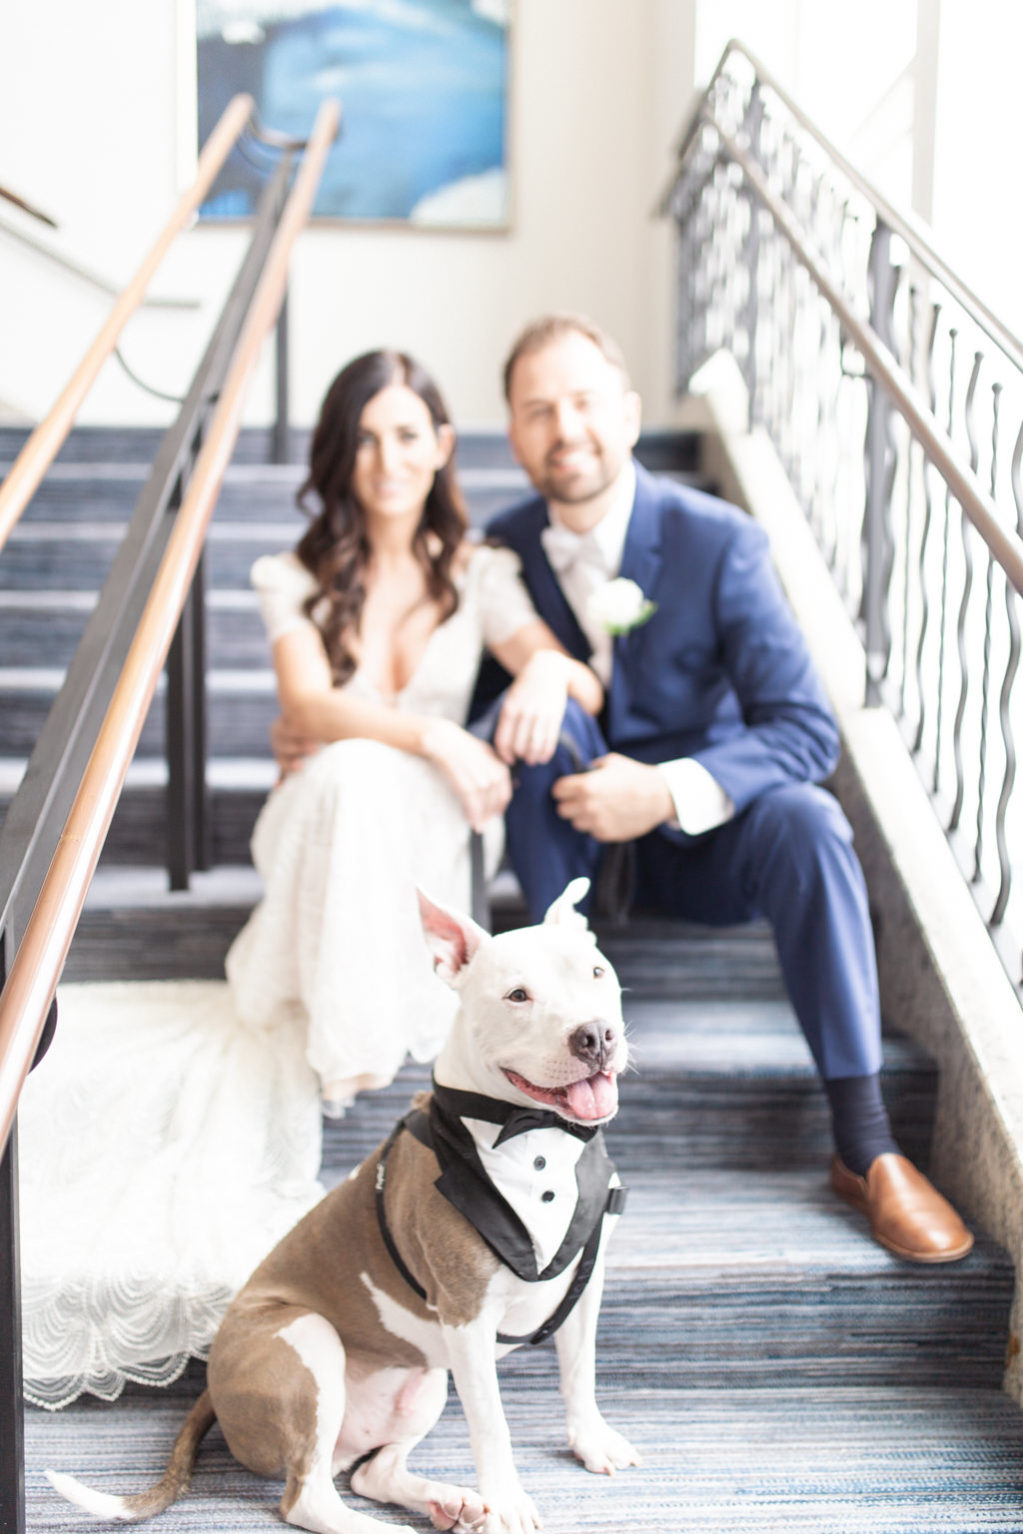 Florida Bride and Groom with Pitbull Dog in Tuxedo Wedding Portrait on Marriott Hotel Staircase | Tampa Wedding Pet Planner FairyTail Pet Care